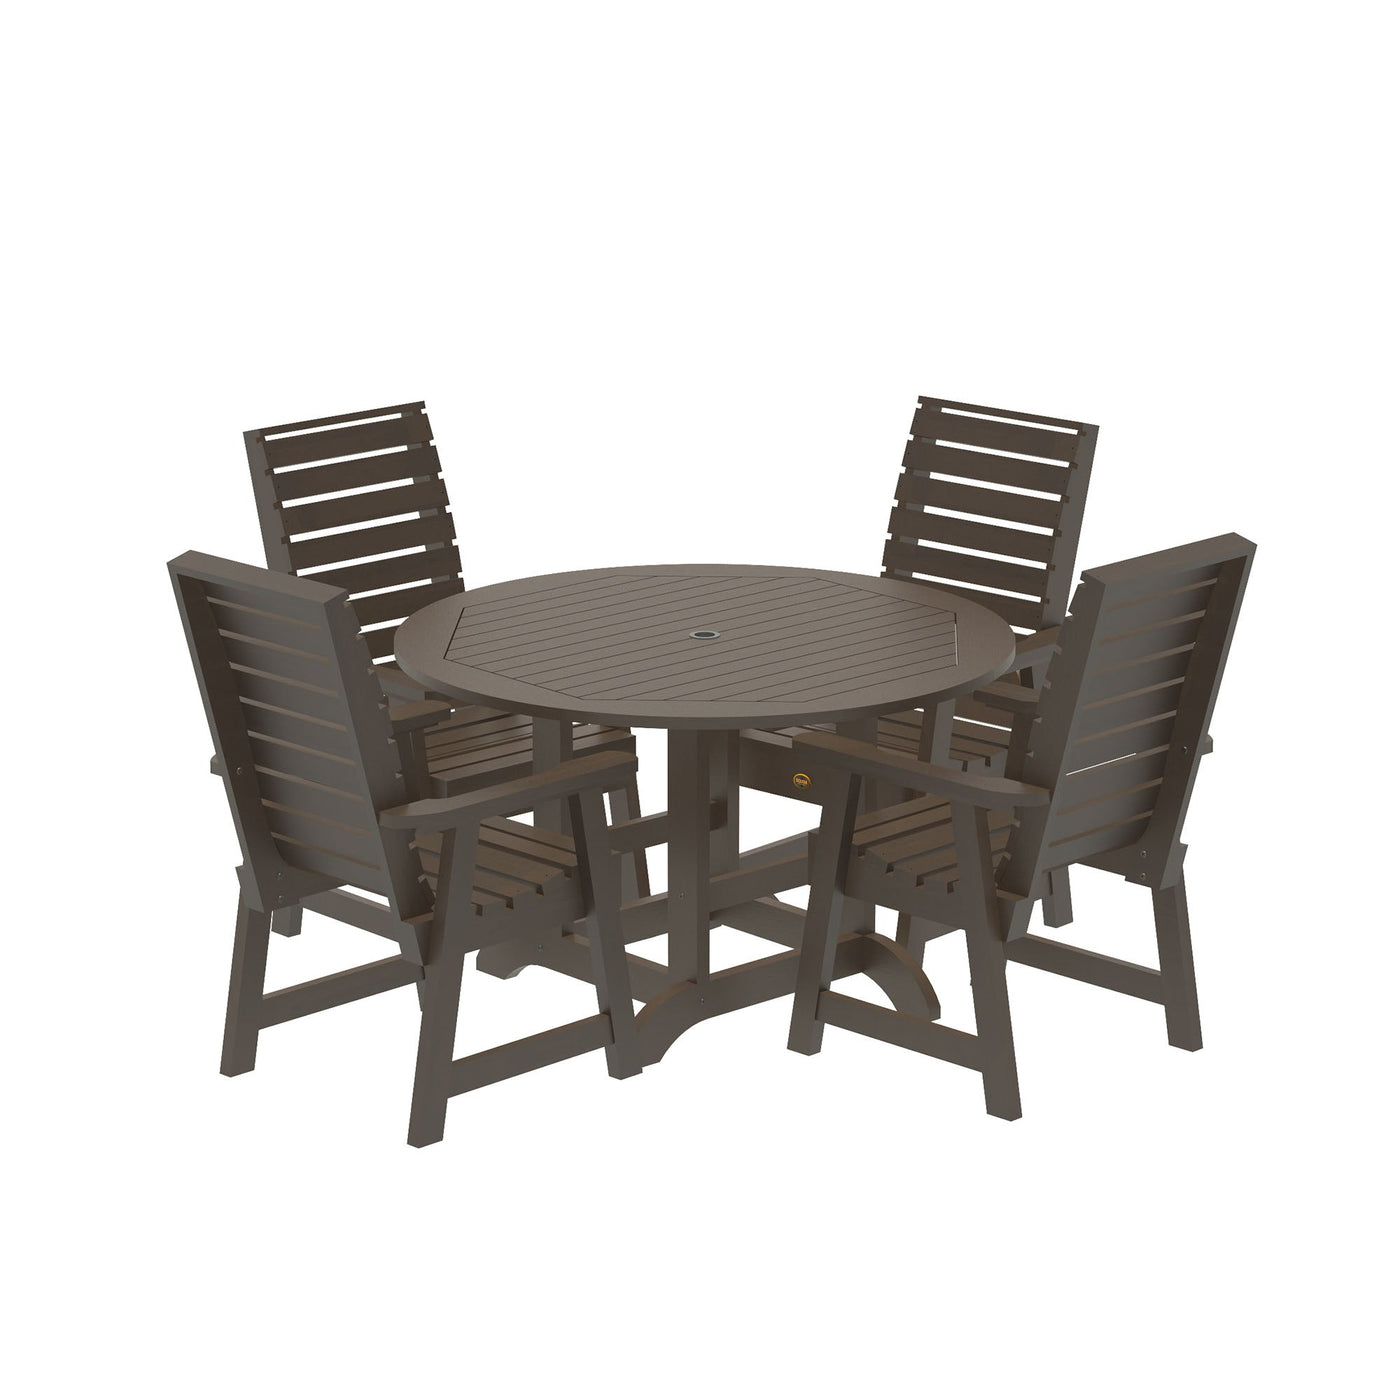 Glennville 5pc Round Dining Set Dining Sequoia Professional Weathered Acorn 